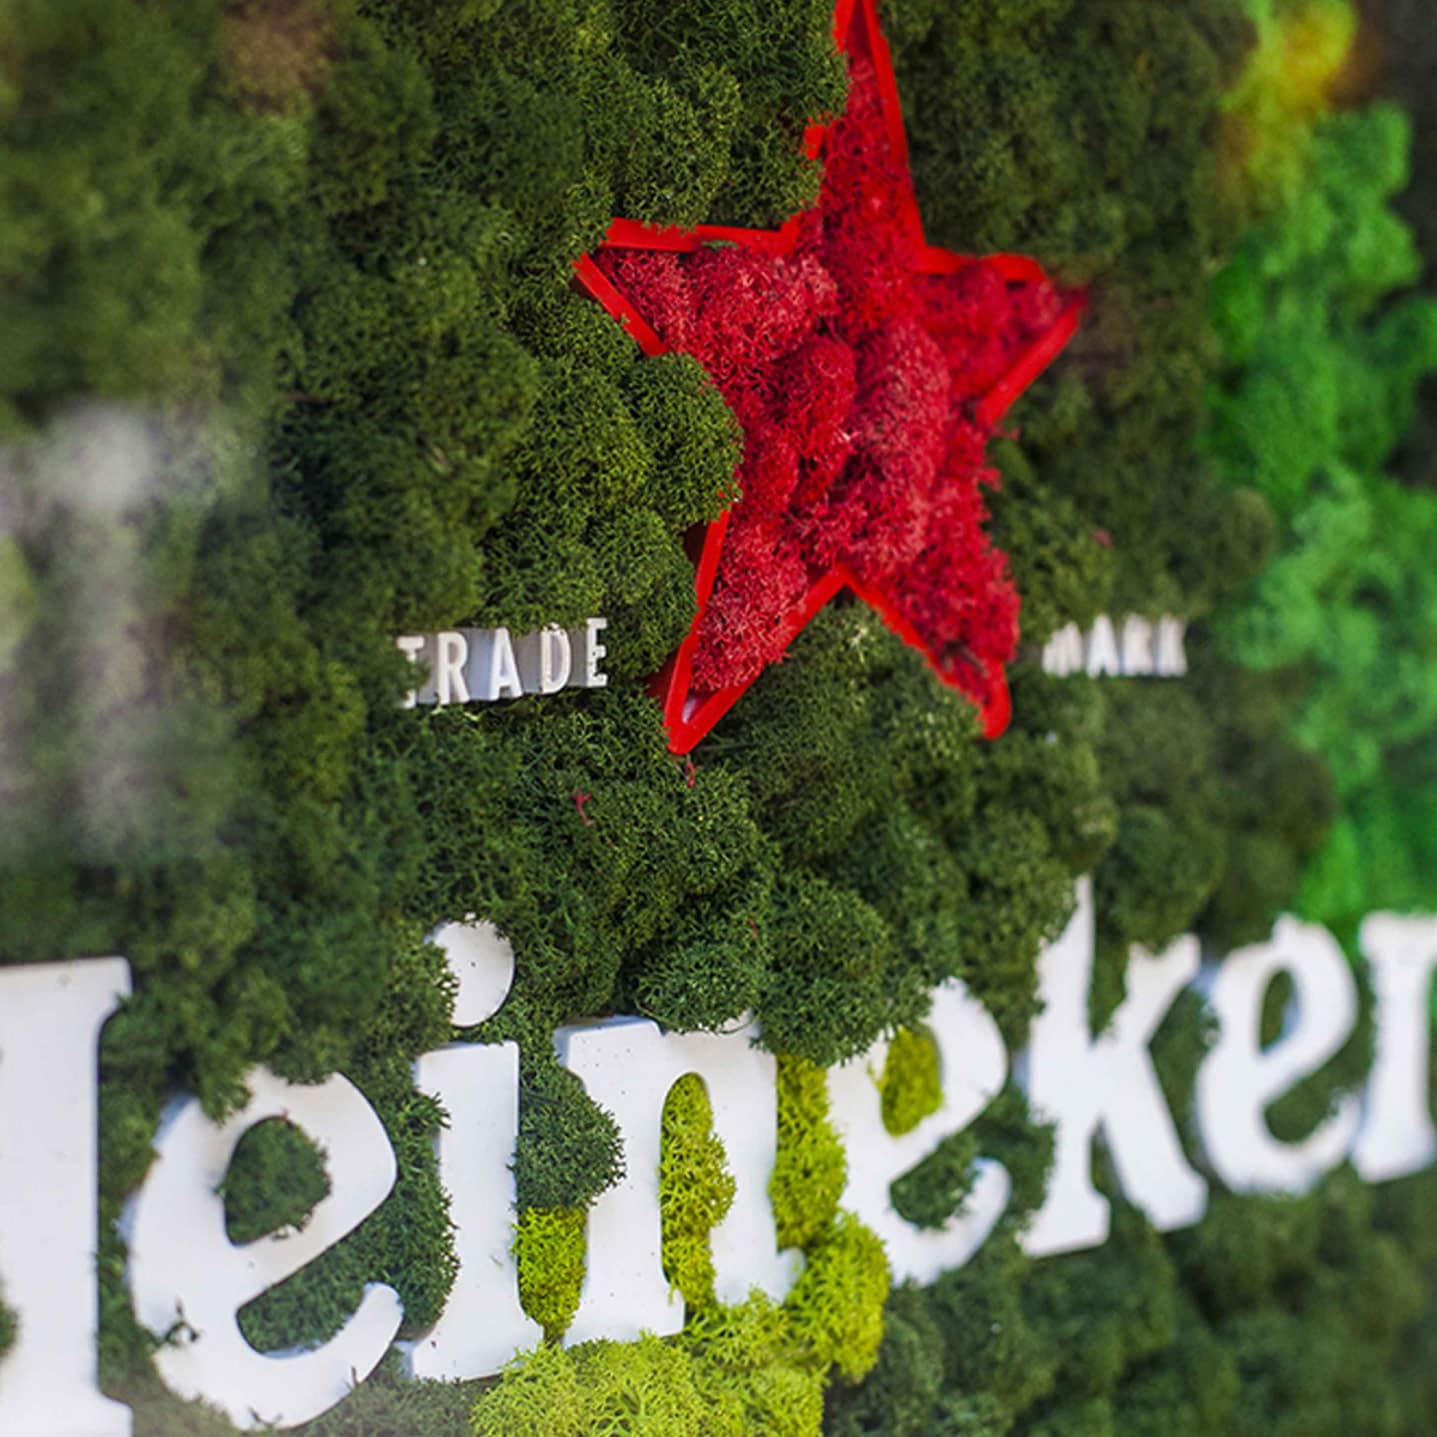 Heineken’s plant-lined living wall signifies the company’s commitment to sustainability